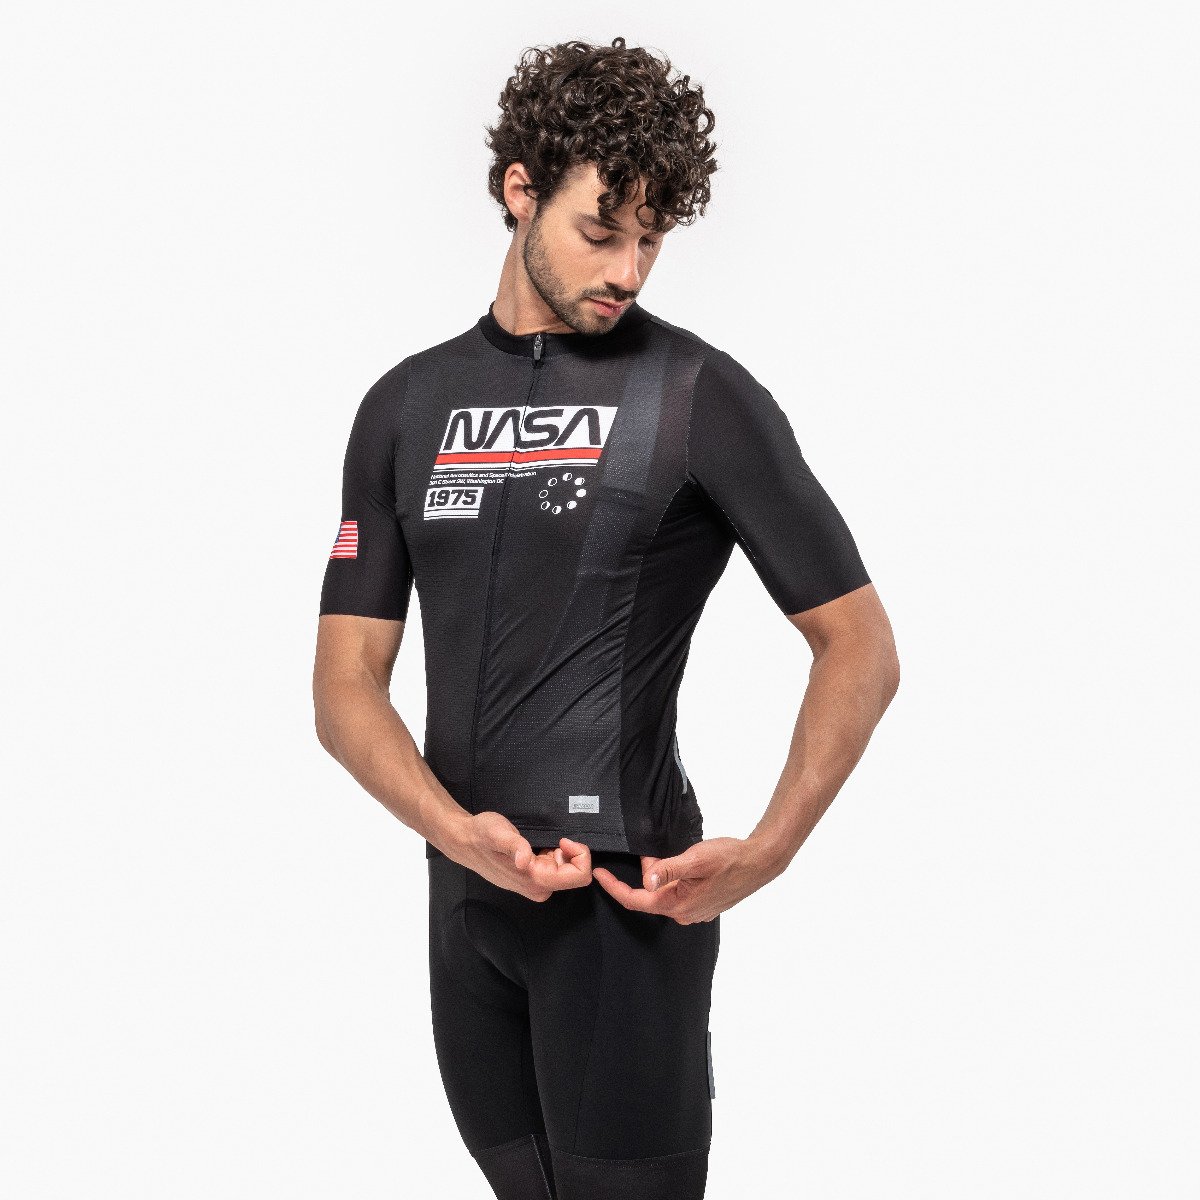 MAILLOT DE CICLISMO X-OVER - SPACE AGENCY 07